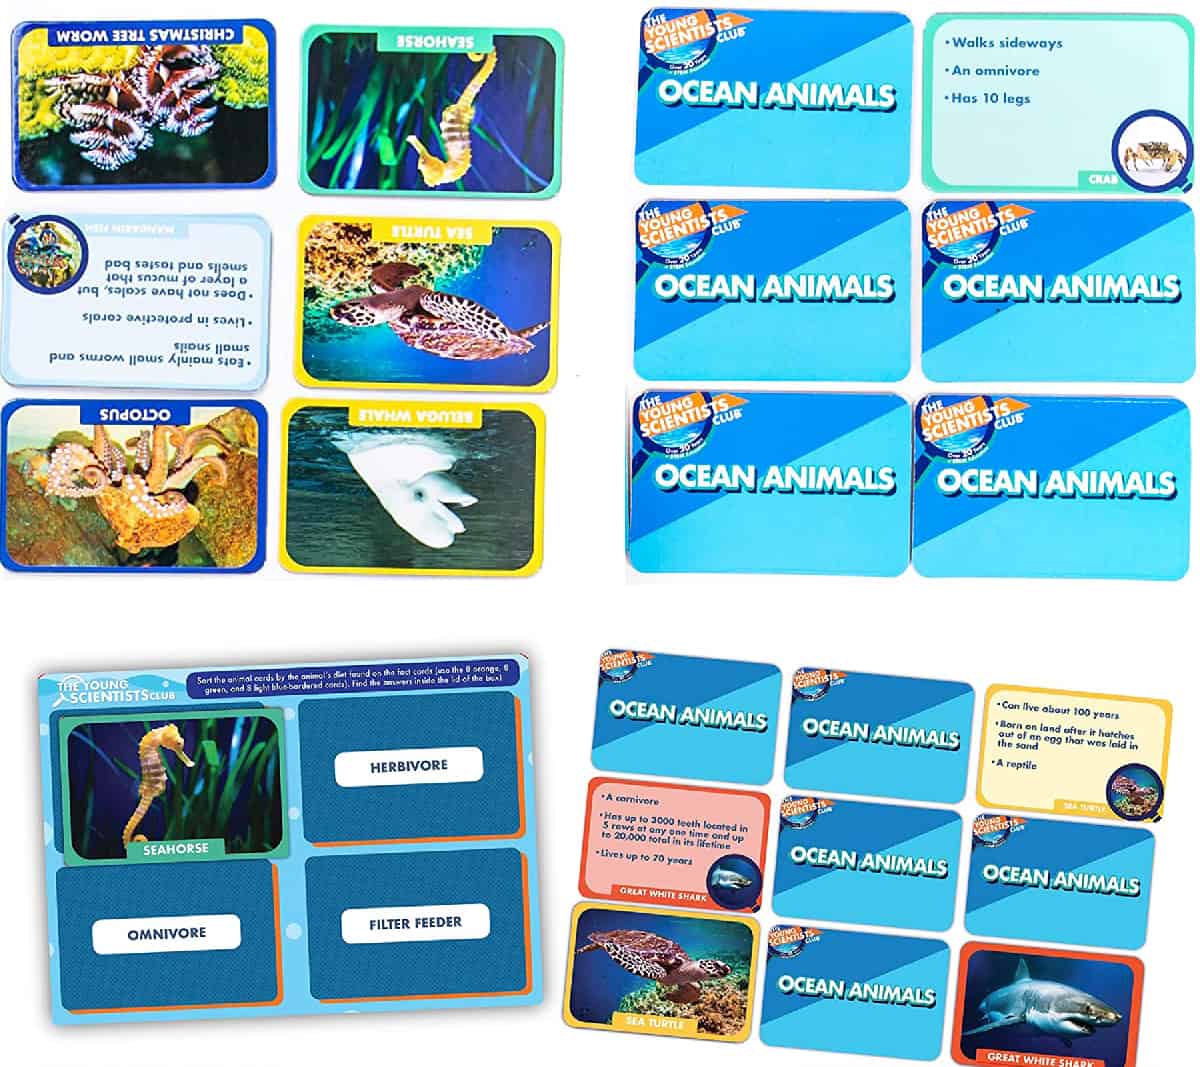 Ocean Animal Card Games (The Young Scientists Club) is a card game about ocean animals.